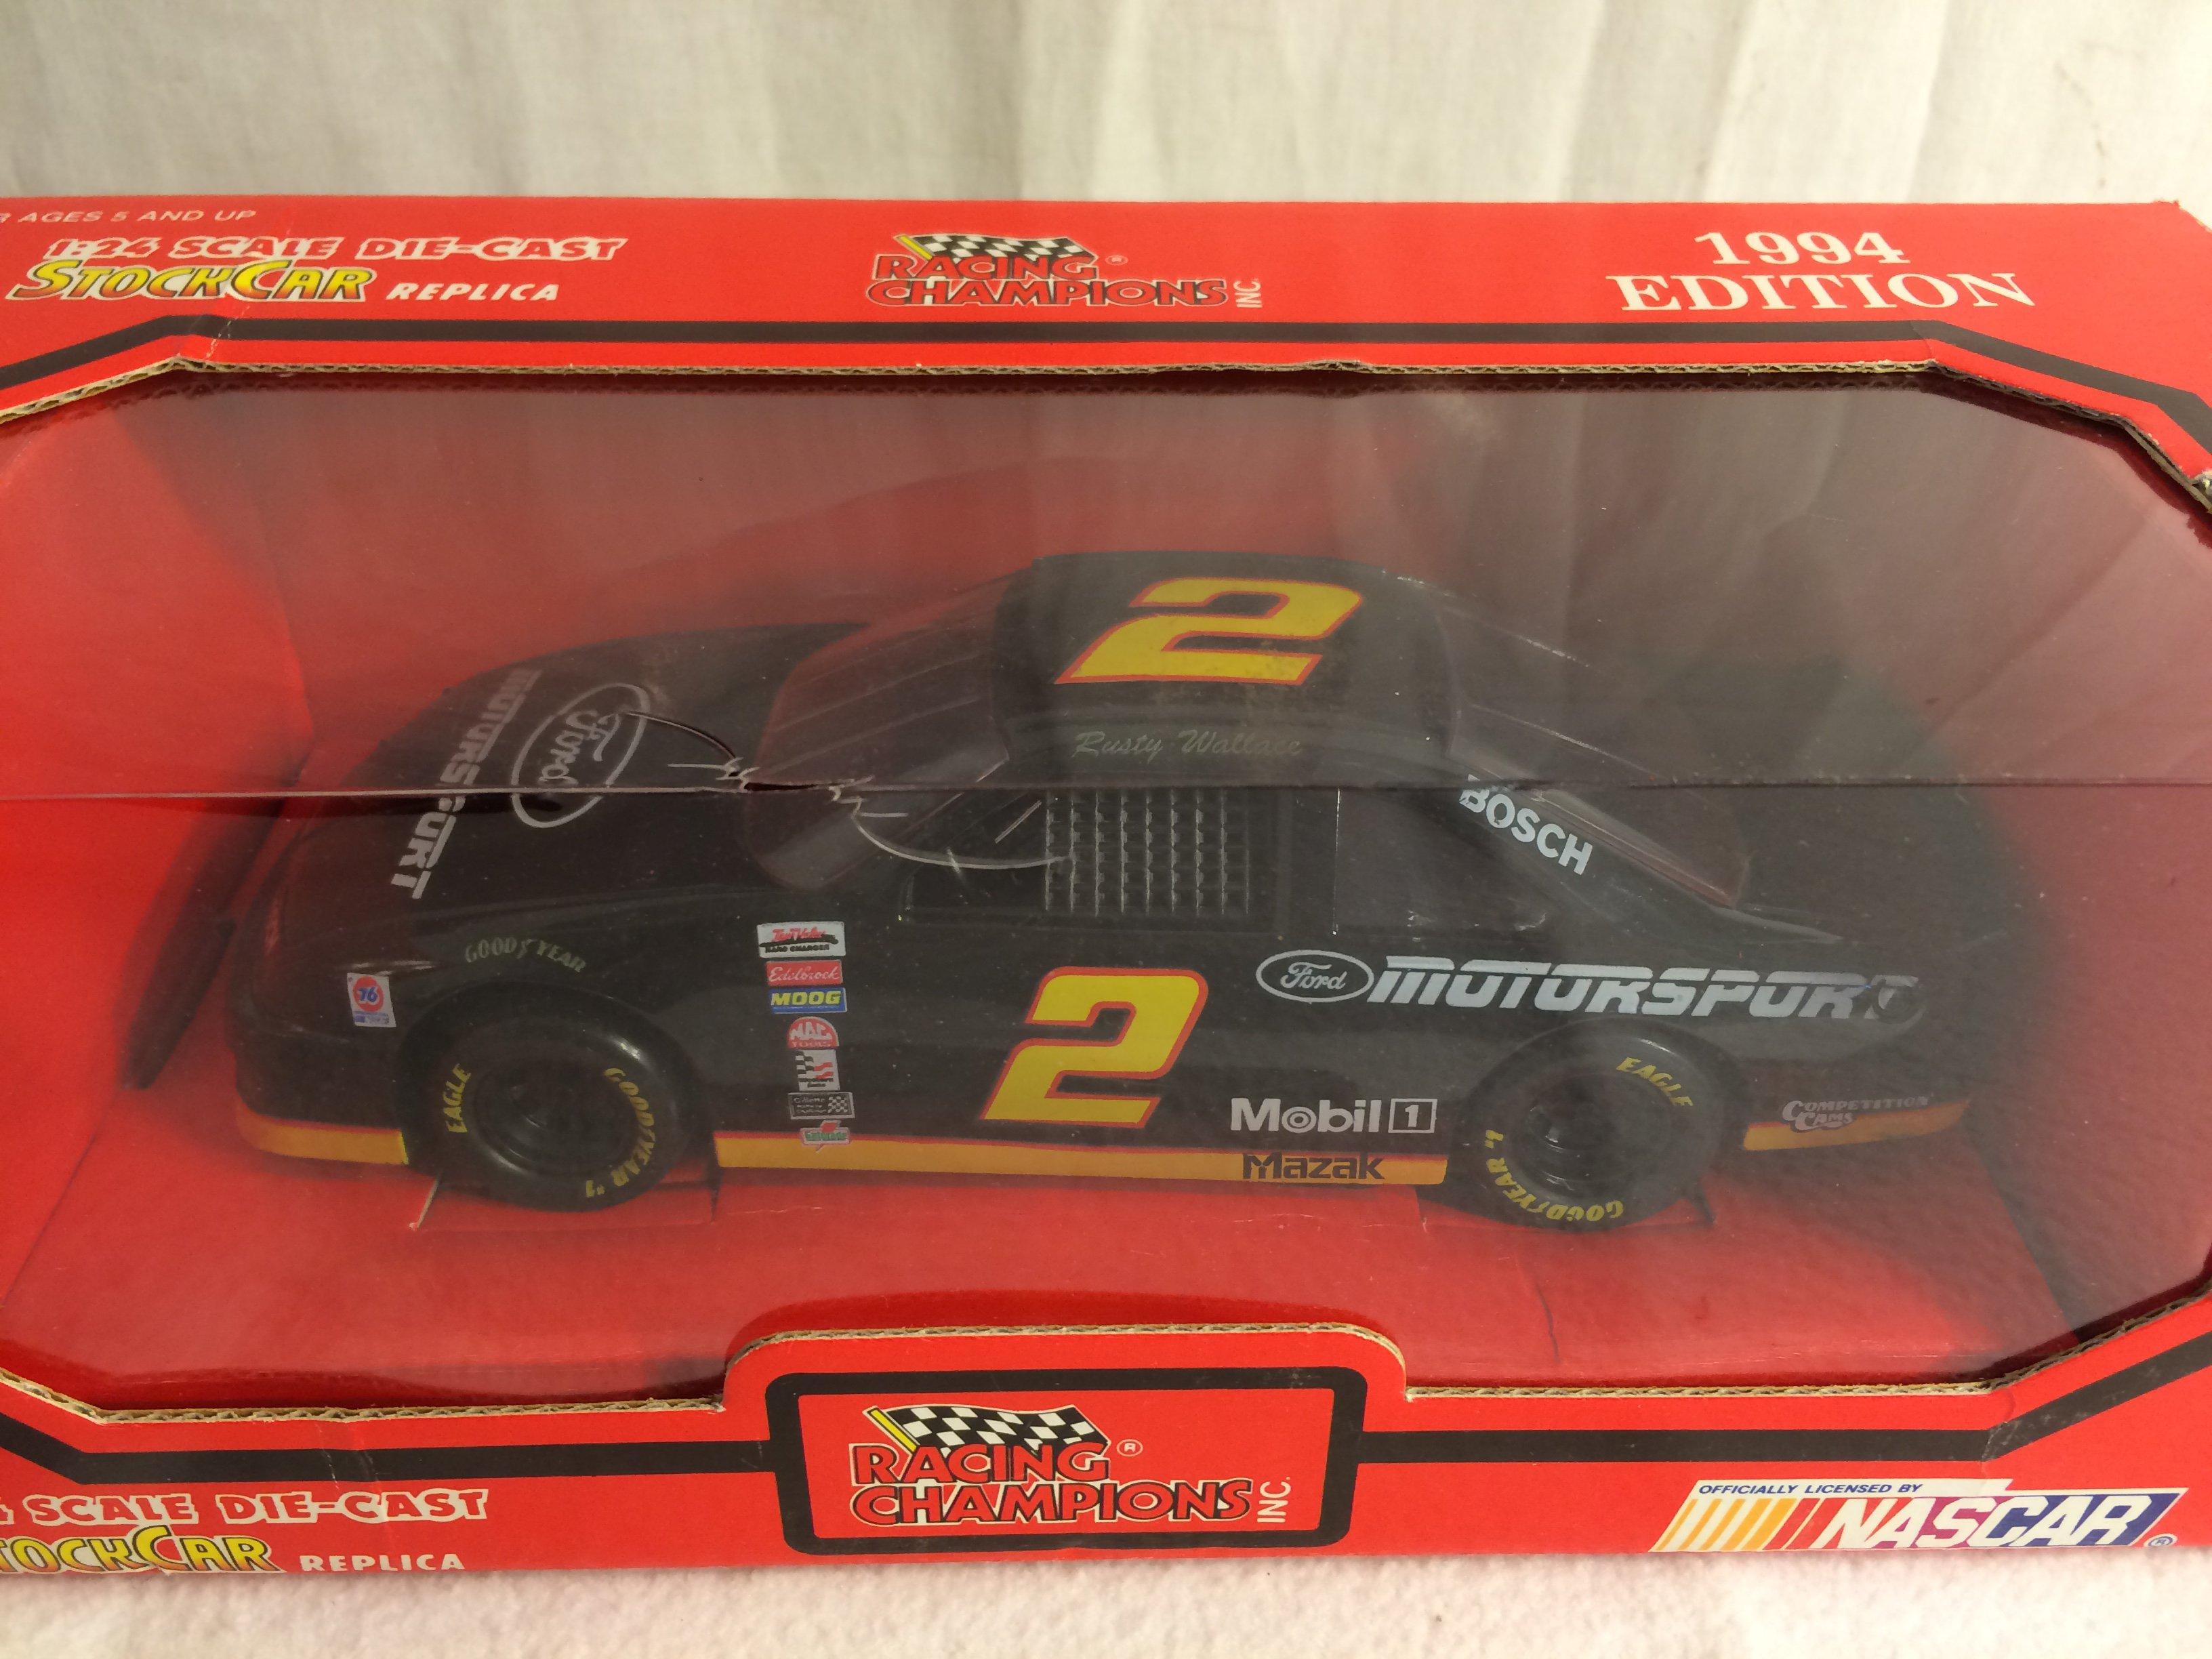 Collector Nascar Racing Champions #2 Ford Motorsport 1:24 Scale Stock Car